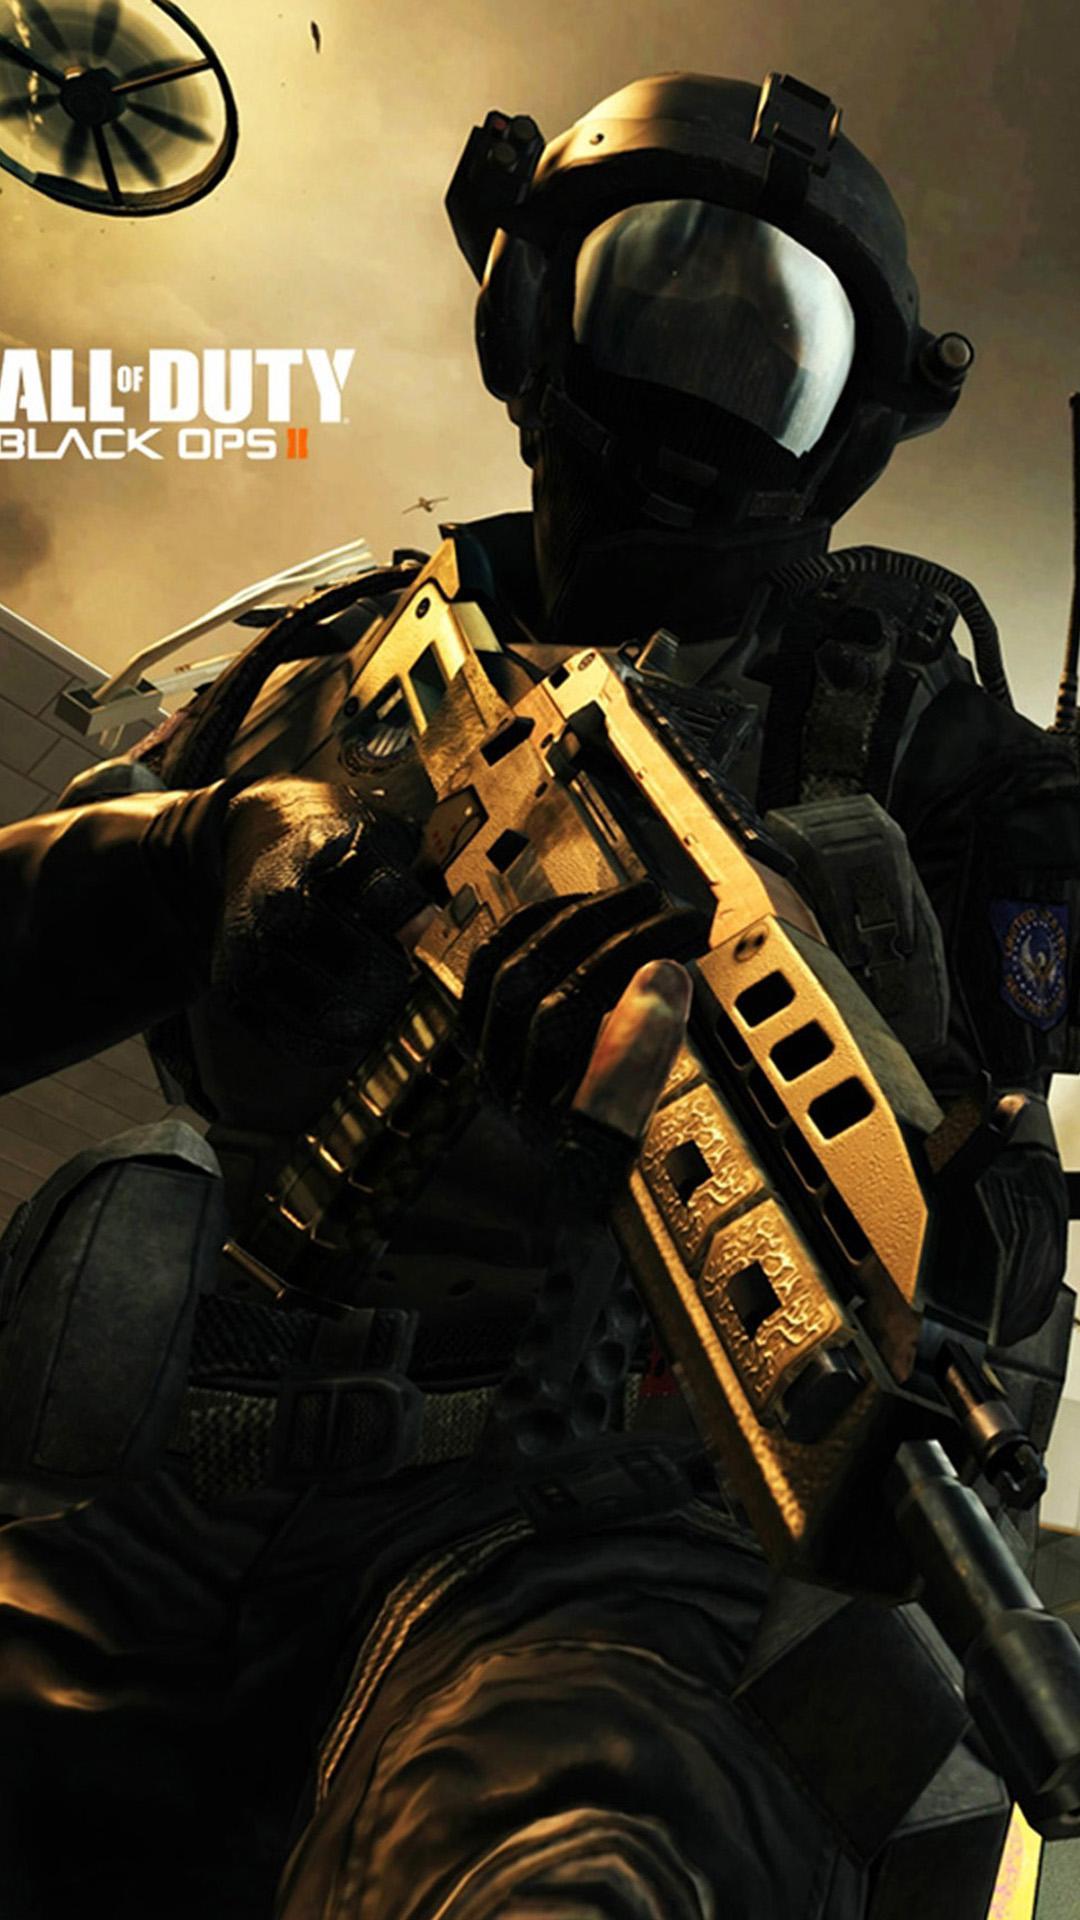 Stunning Call Of Duty Wallpaper Android image For Free